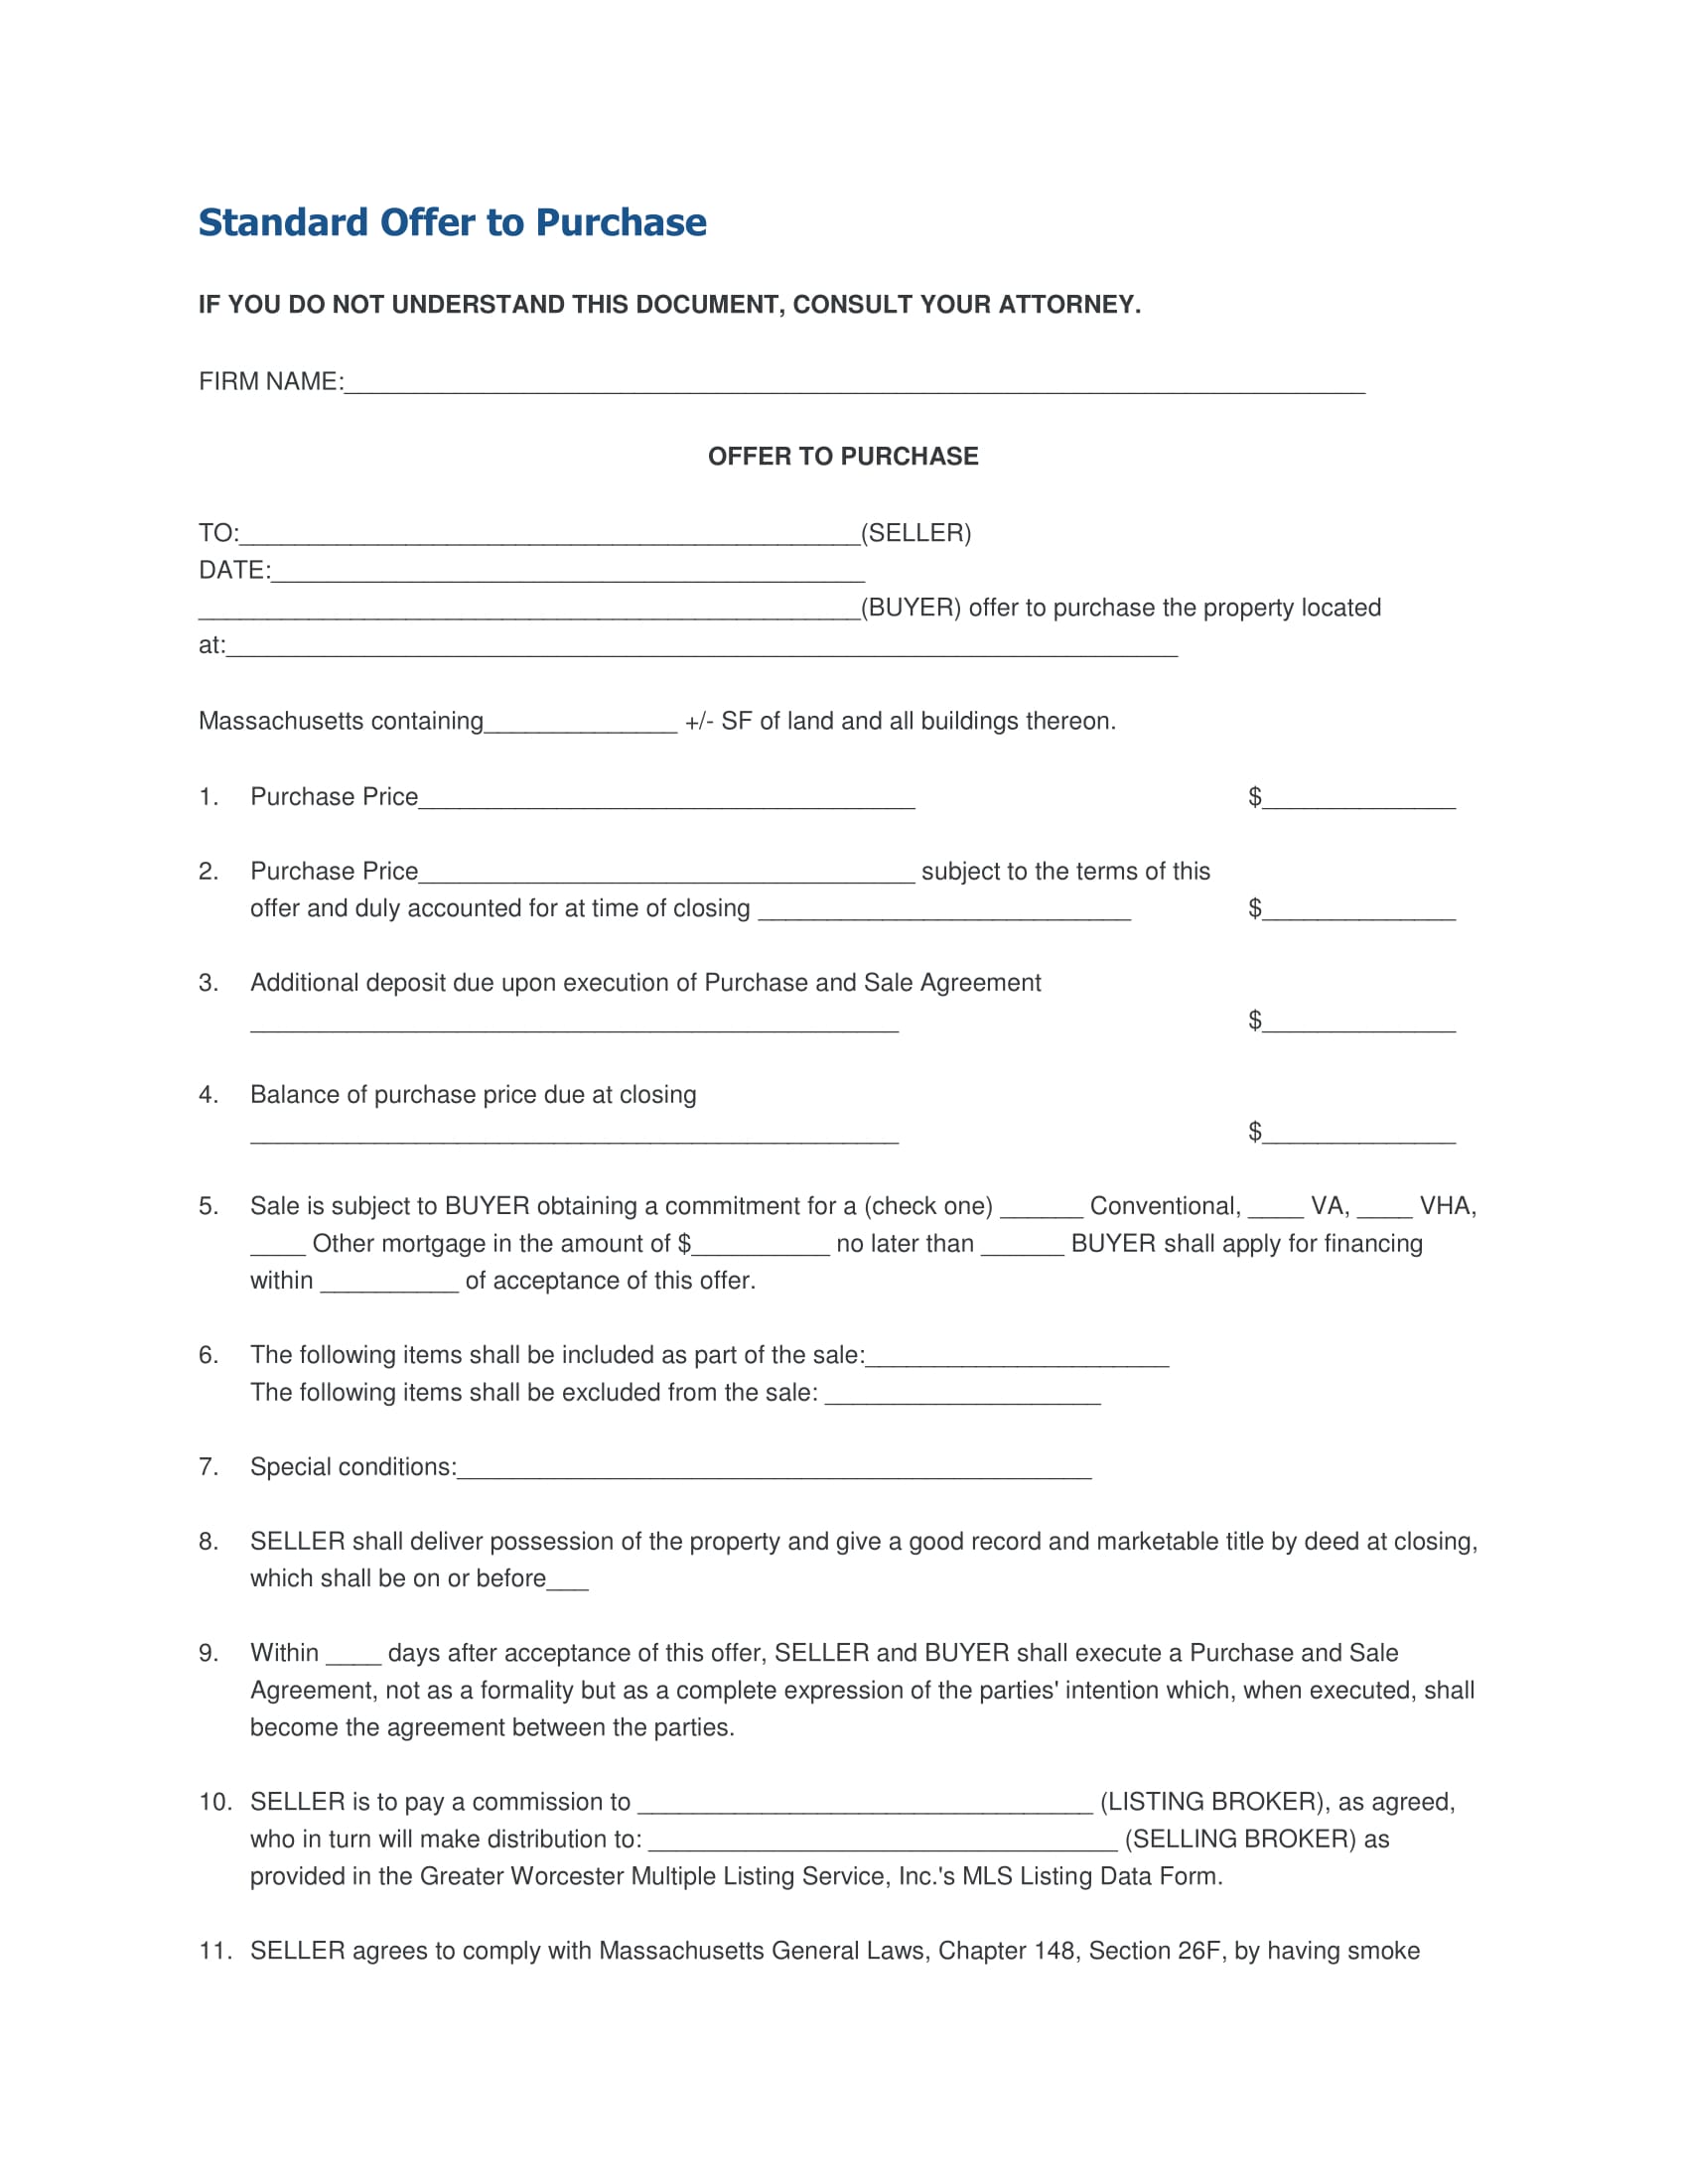 purchase offer form 1